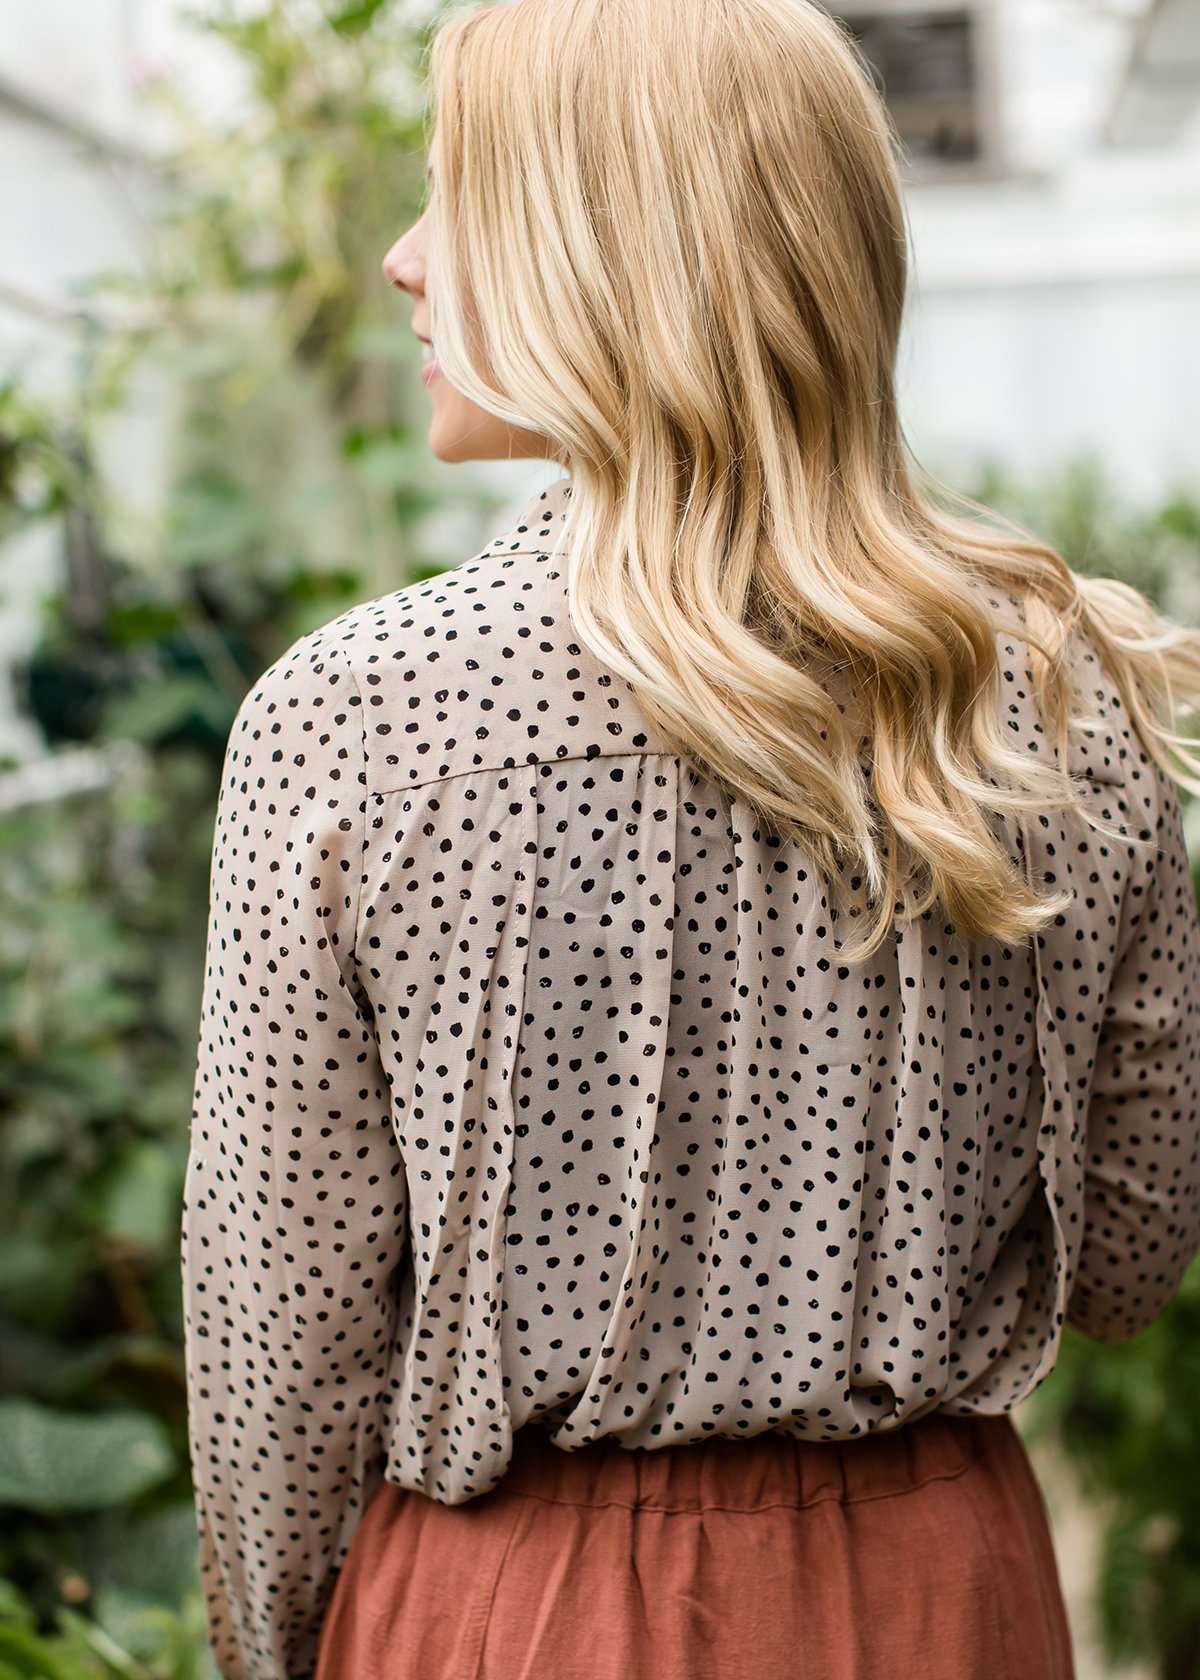 polyester sheer taupe top with black polka dots